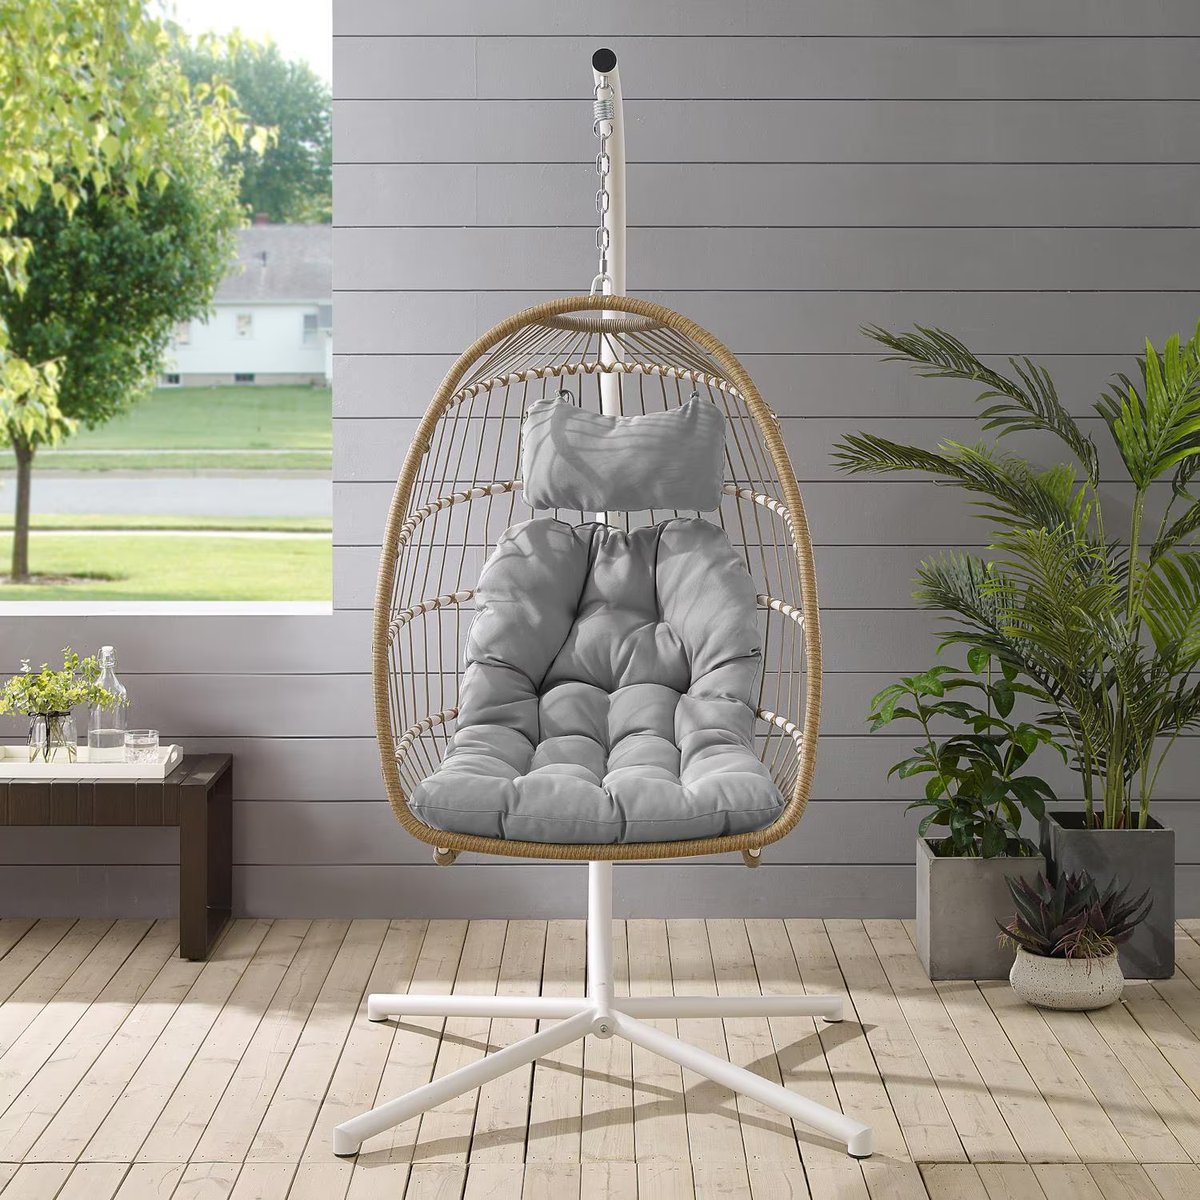 Treat Mom to the ultimate relaxation spot this Mother's Day with our Hanging Hammock Swing Chair! 💐 Crafted with a curved steel frame and all-weather resin rattan, it's perfect for both indoor and outdoor cozy retreats. ow.ly/BmFm50RmCrL